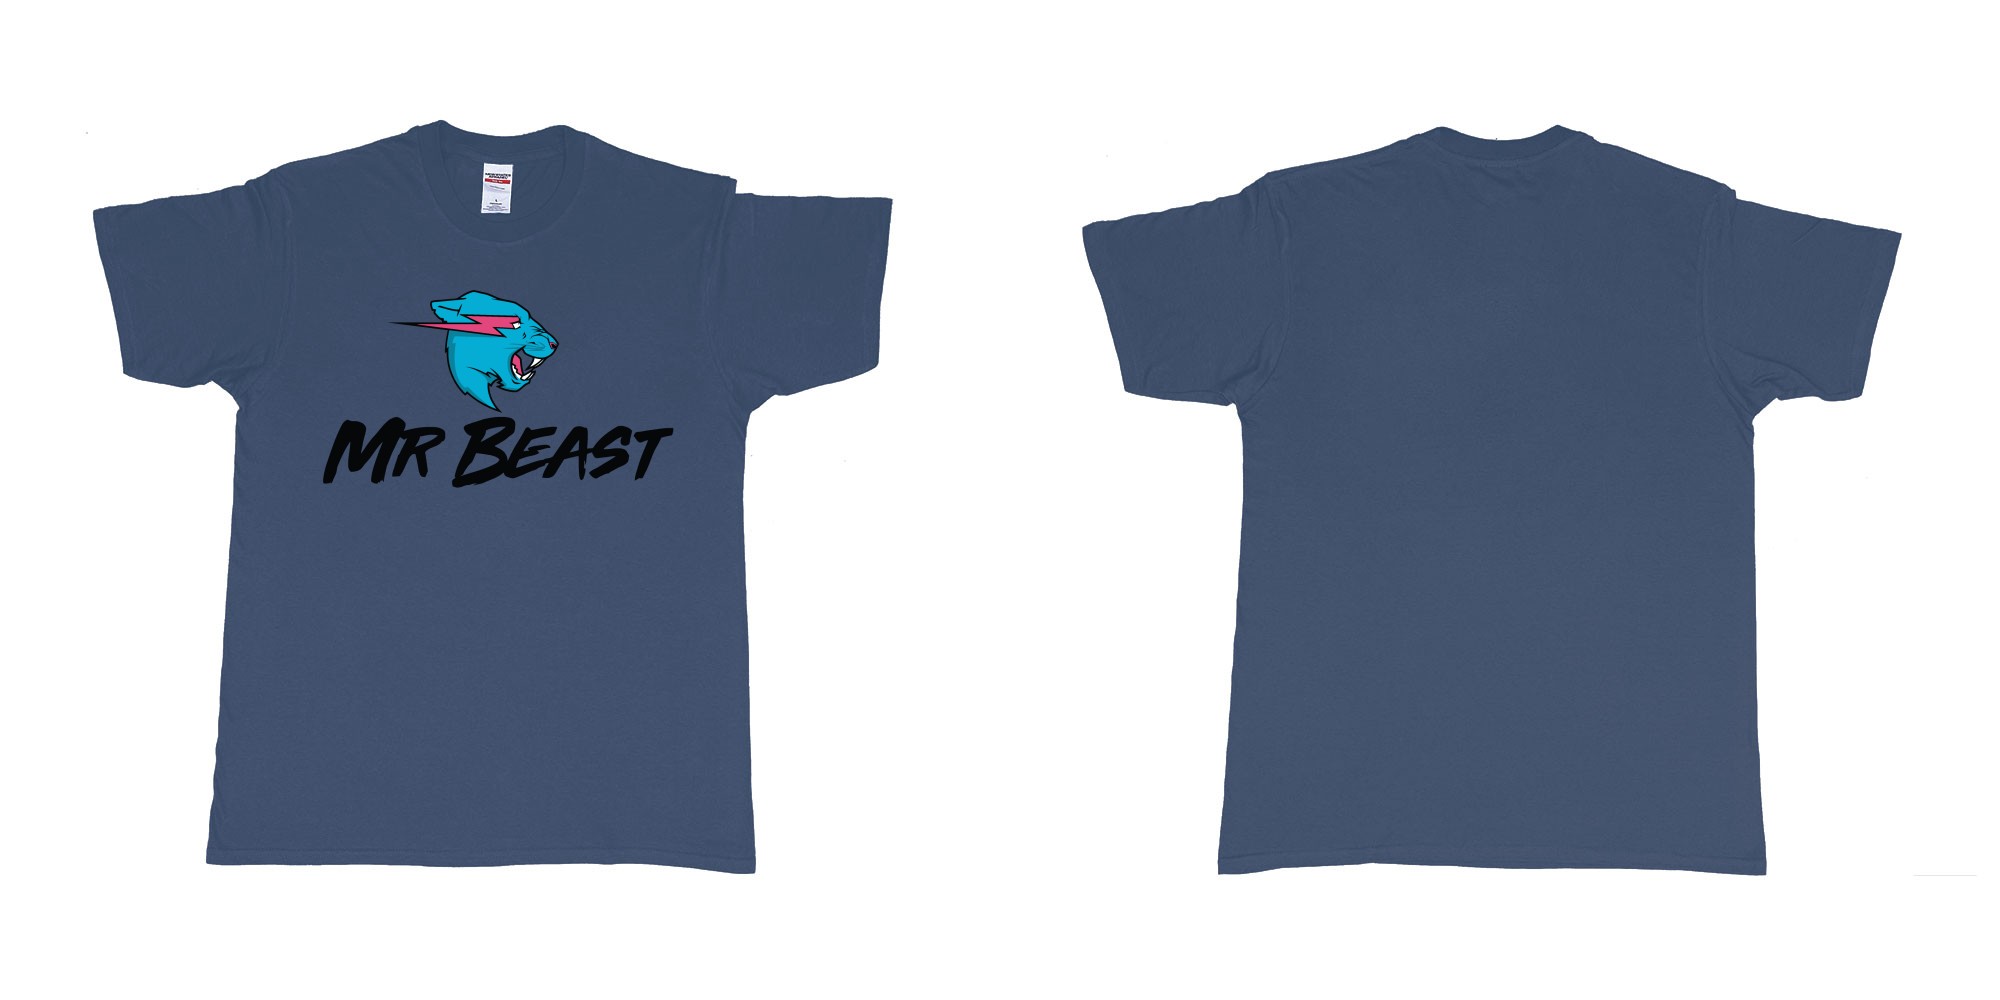 Custom tshirt design mr beast logo in fabric color navy choice your own text made in Bali by The Pirate Way